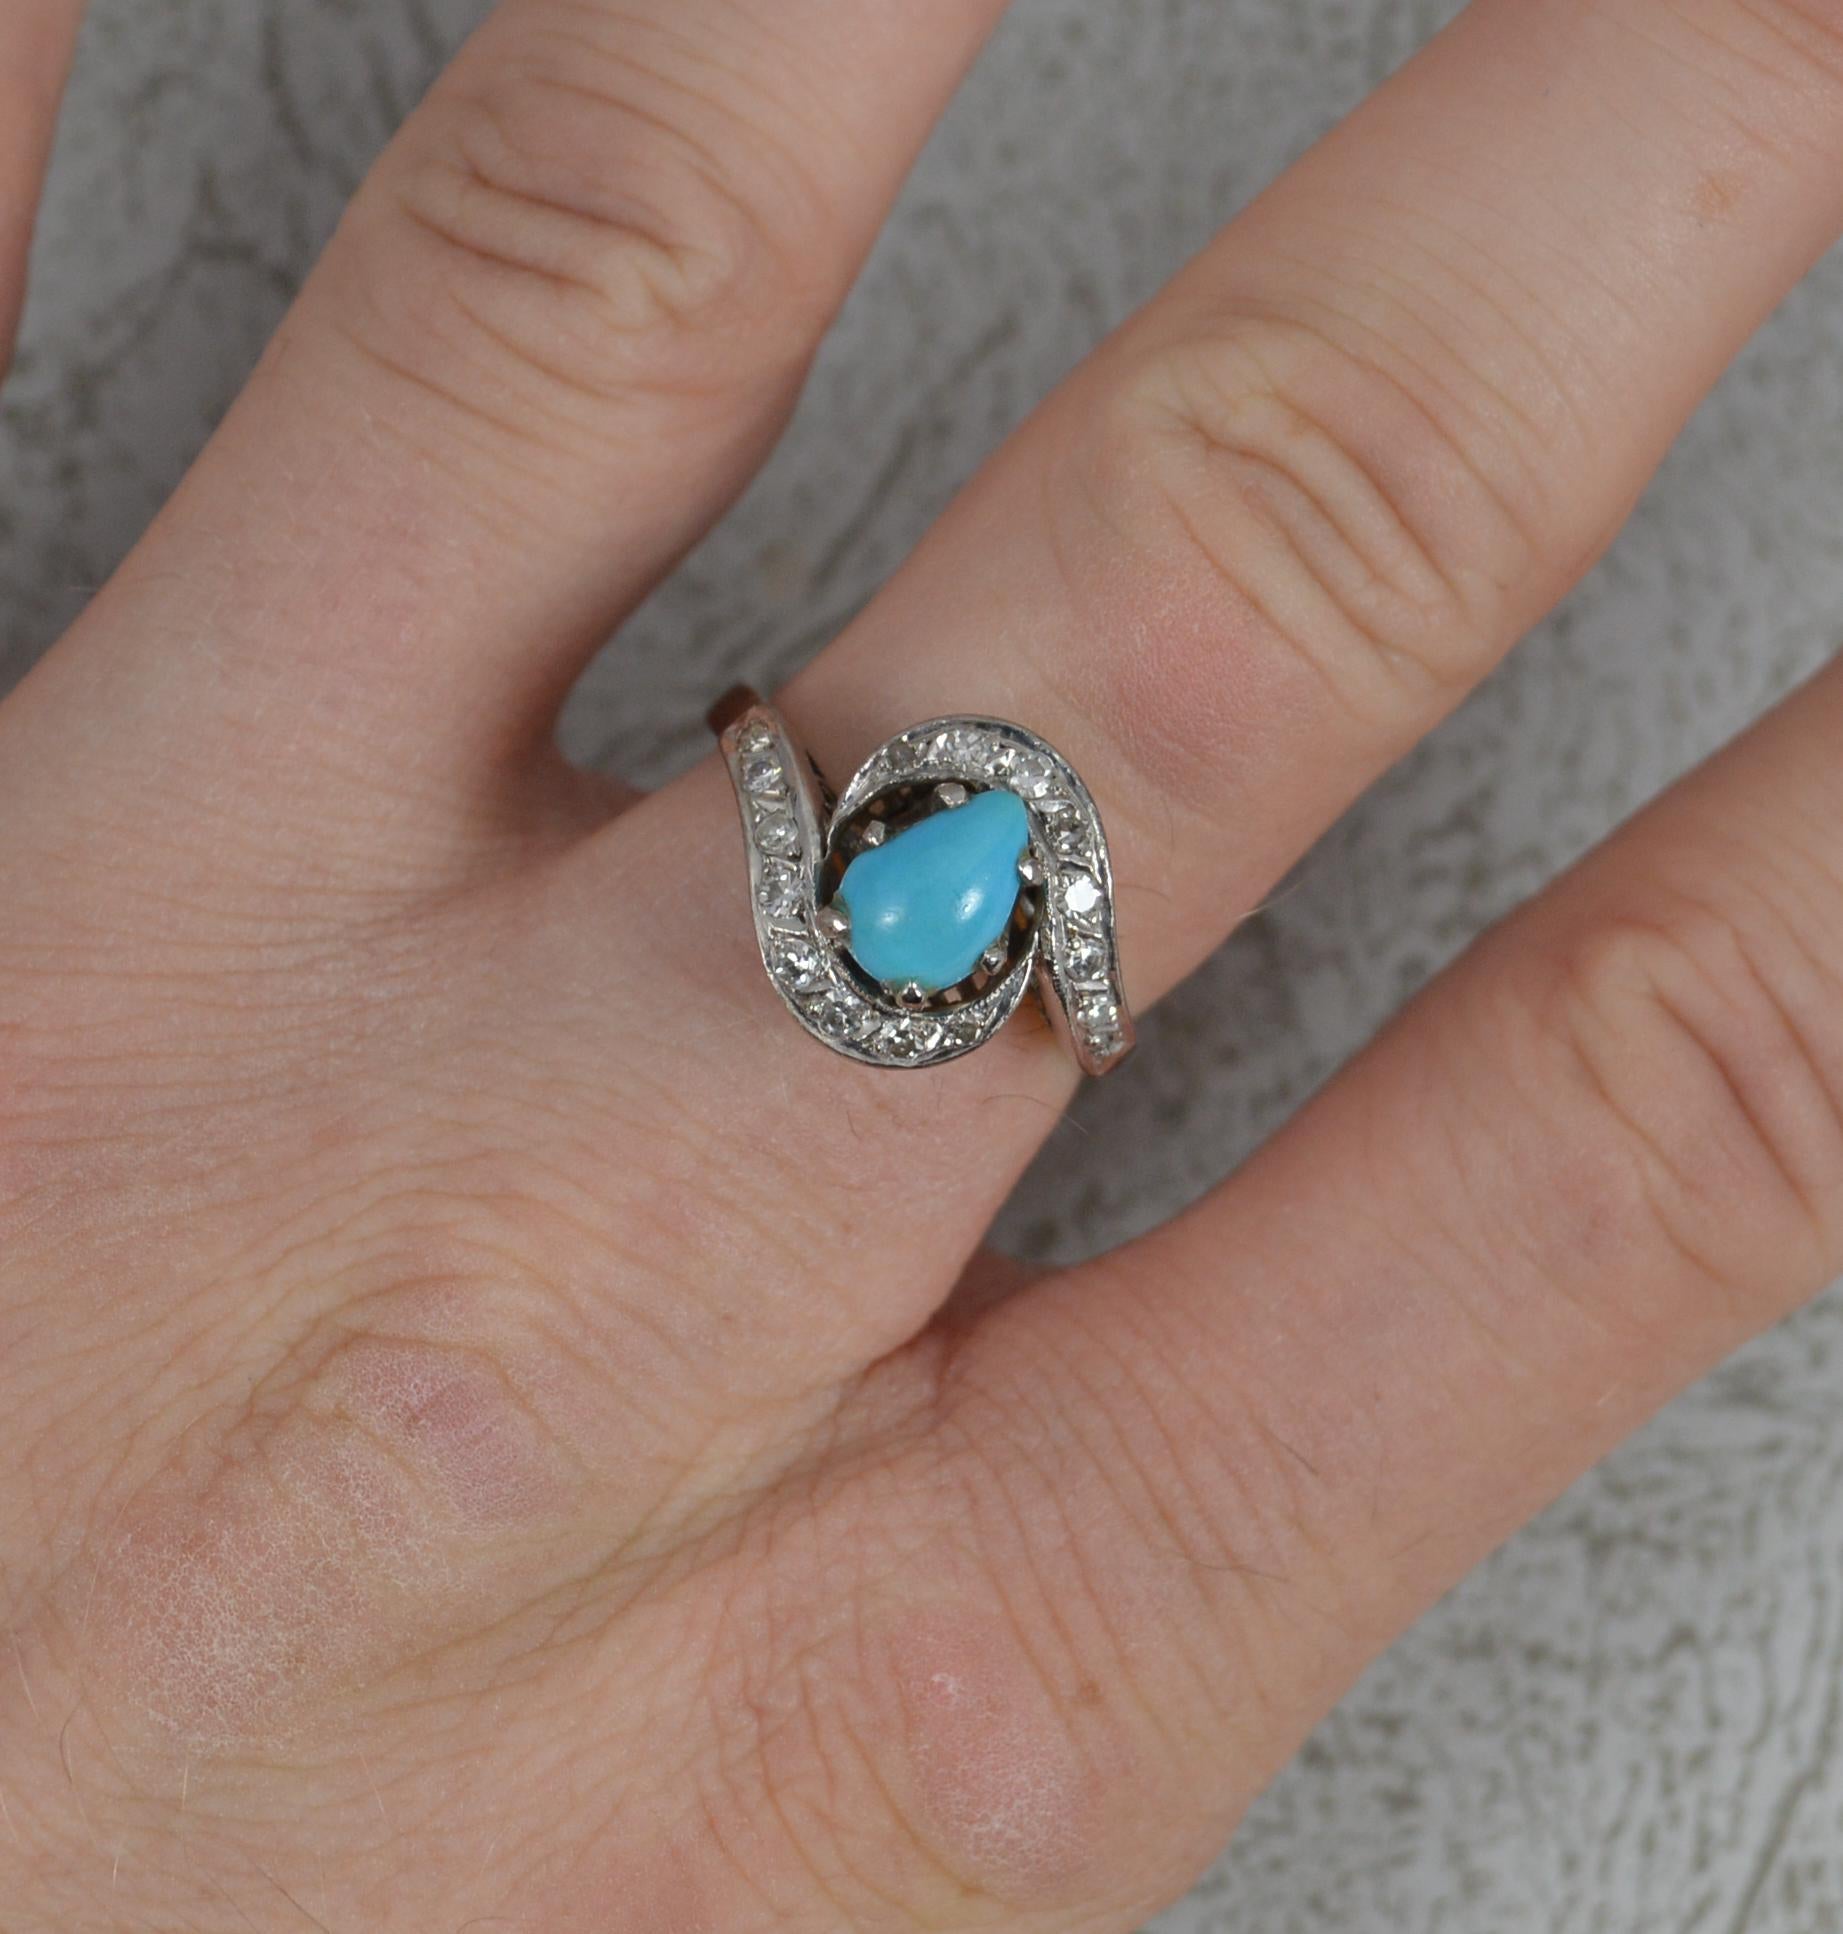 A stylish vintage cluster ring.
Solid 14 carat white gold example.
Set with a pear shaped turquoise to centre and small round cut diamonds surrounding on a twist.
17mm spread of stones. 13mm wide.

CONDITION ; Very good for age. Clean shank. Well